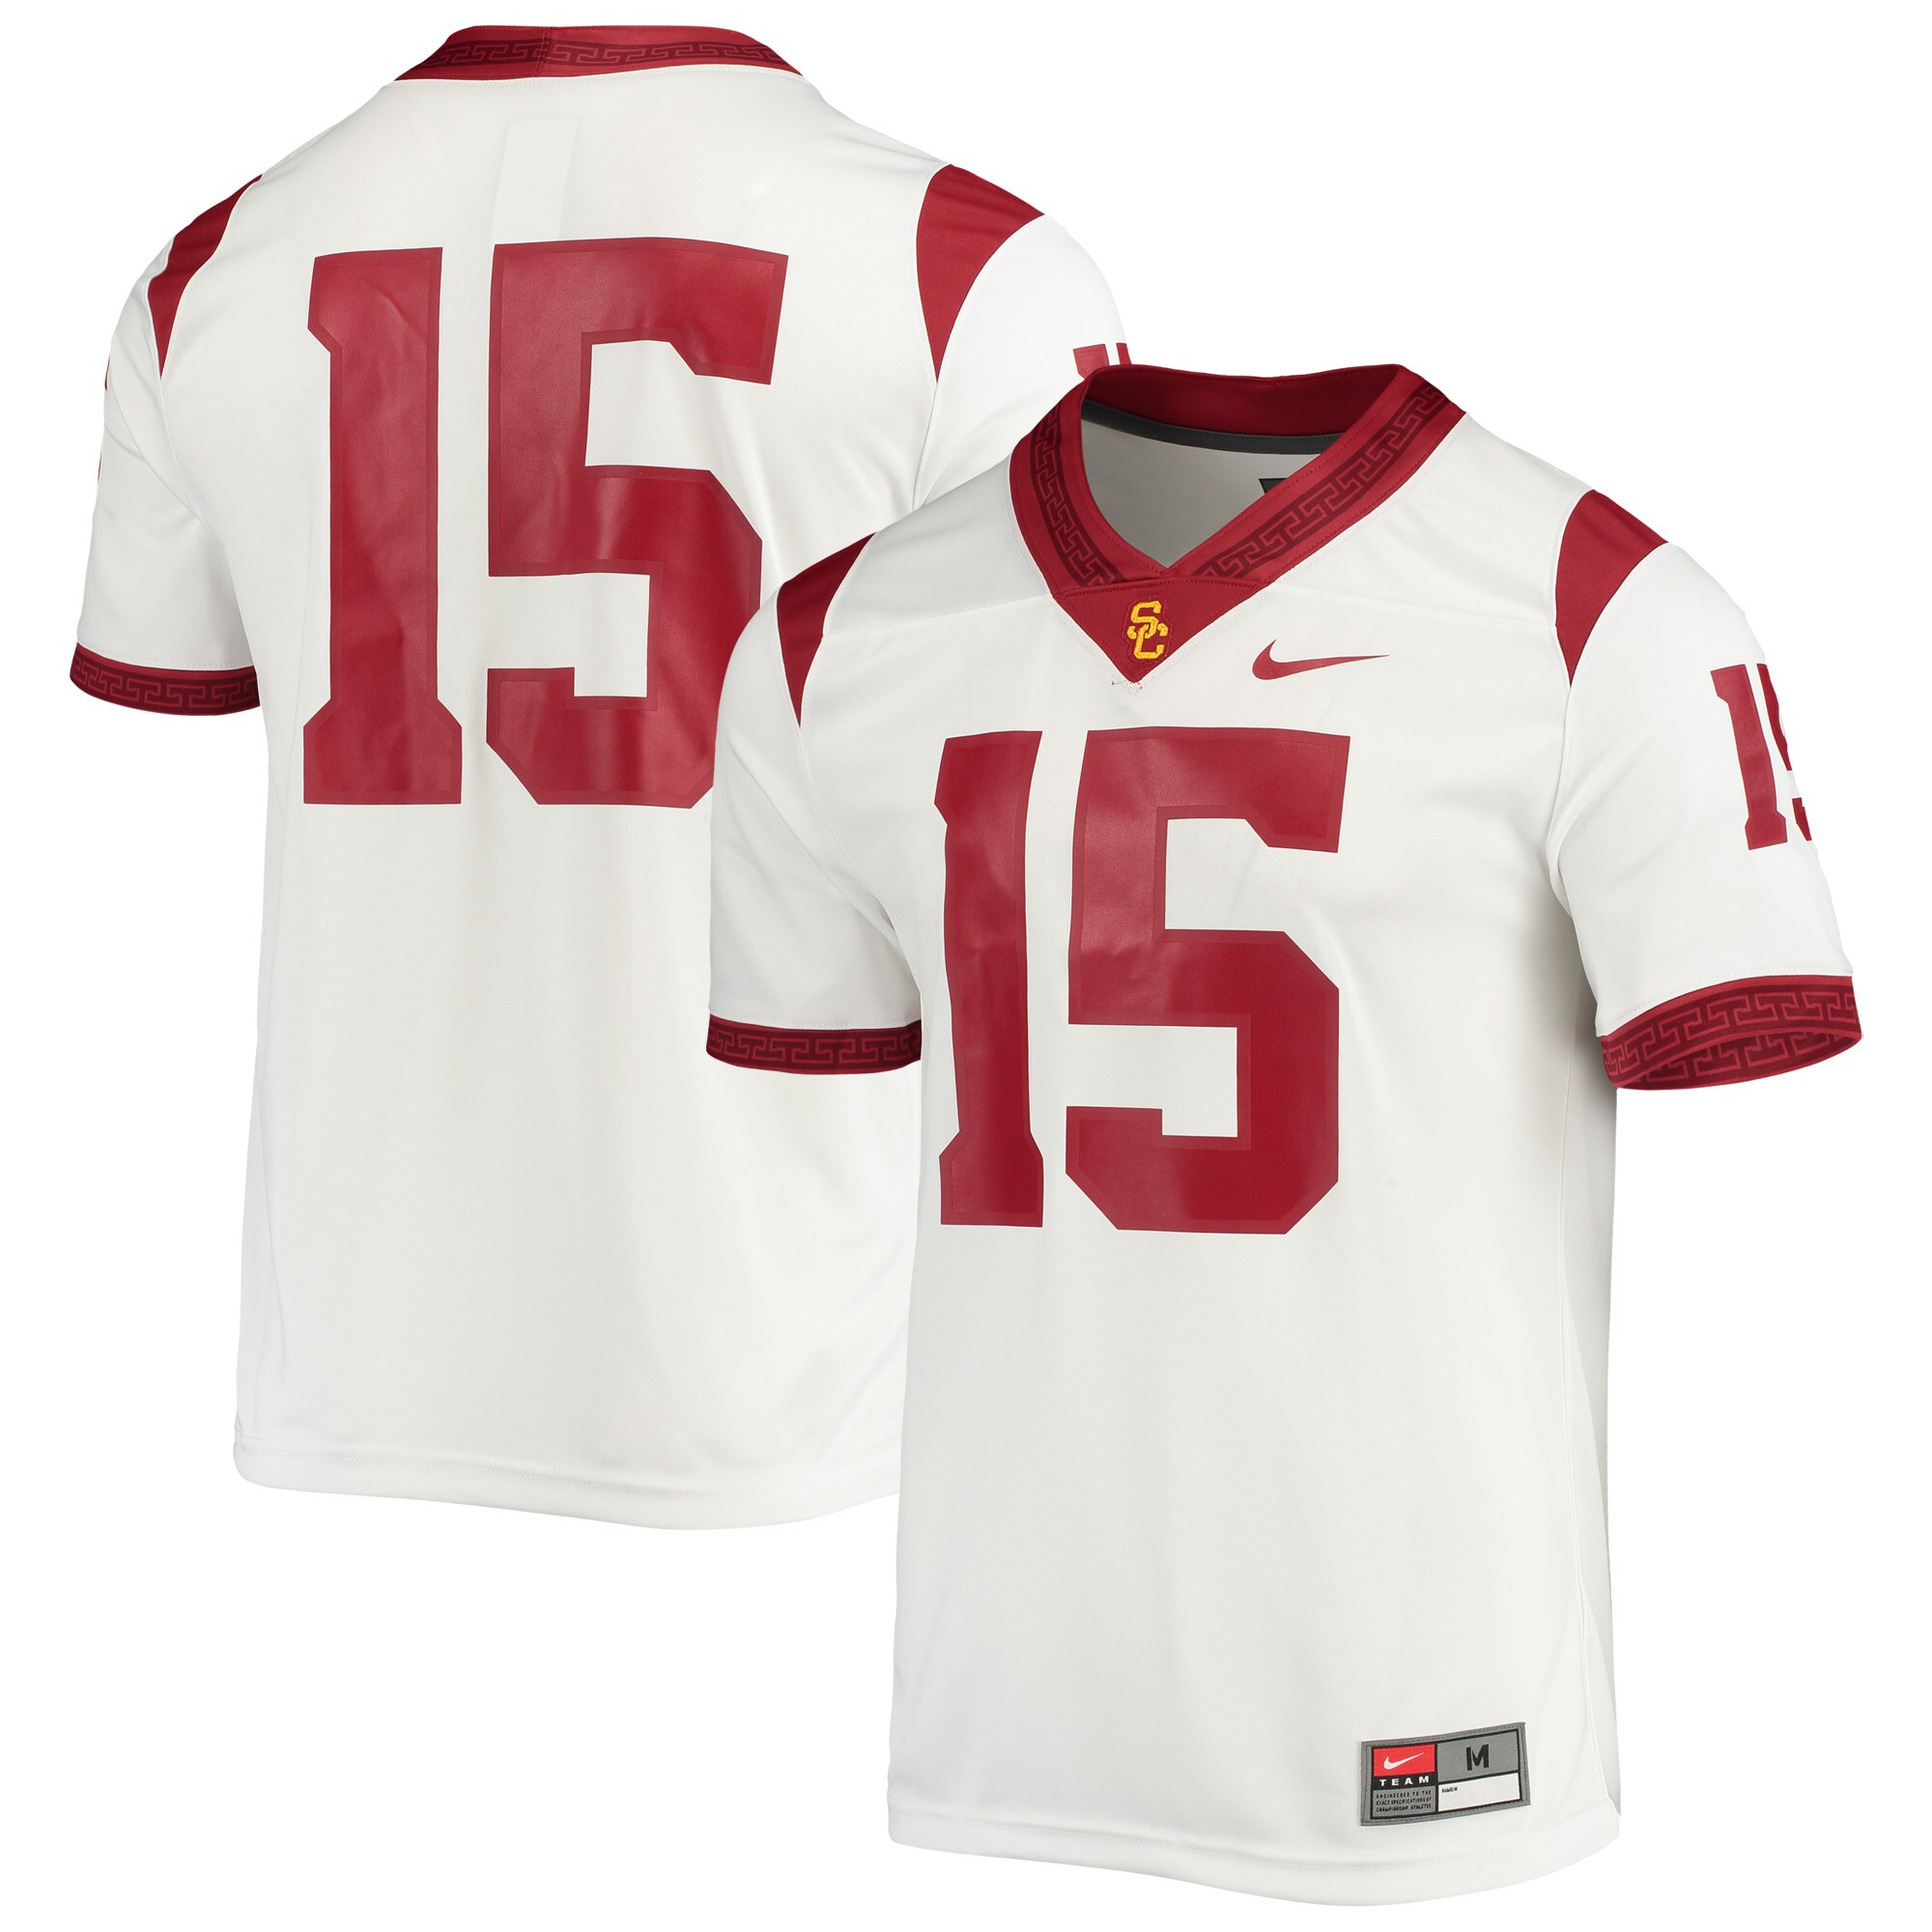 #15 Usc Trojans Game Jersey - White For Youth Women Men